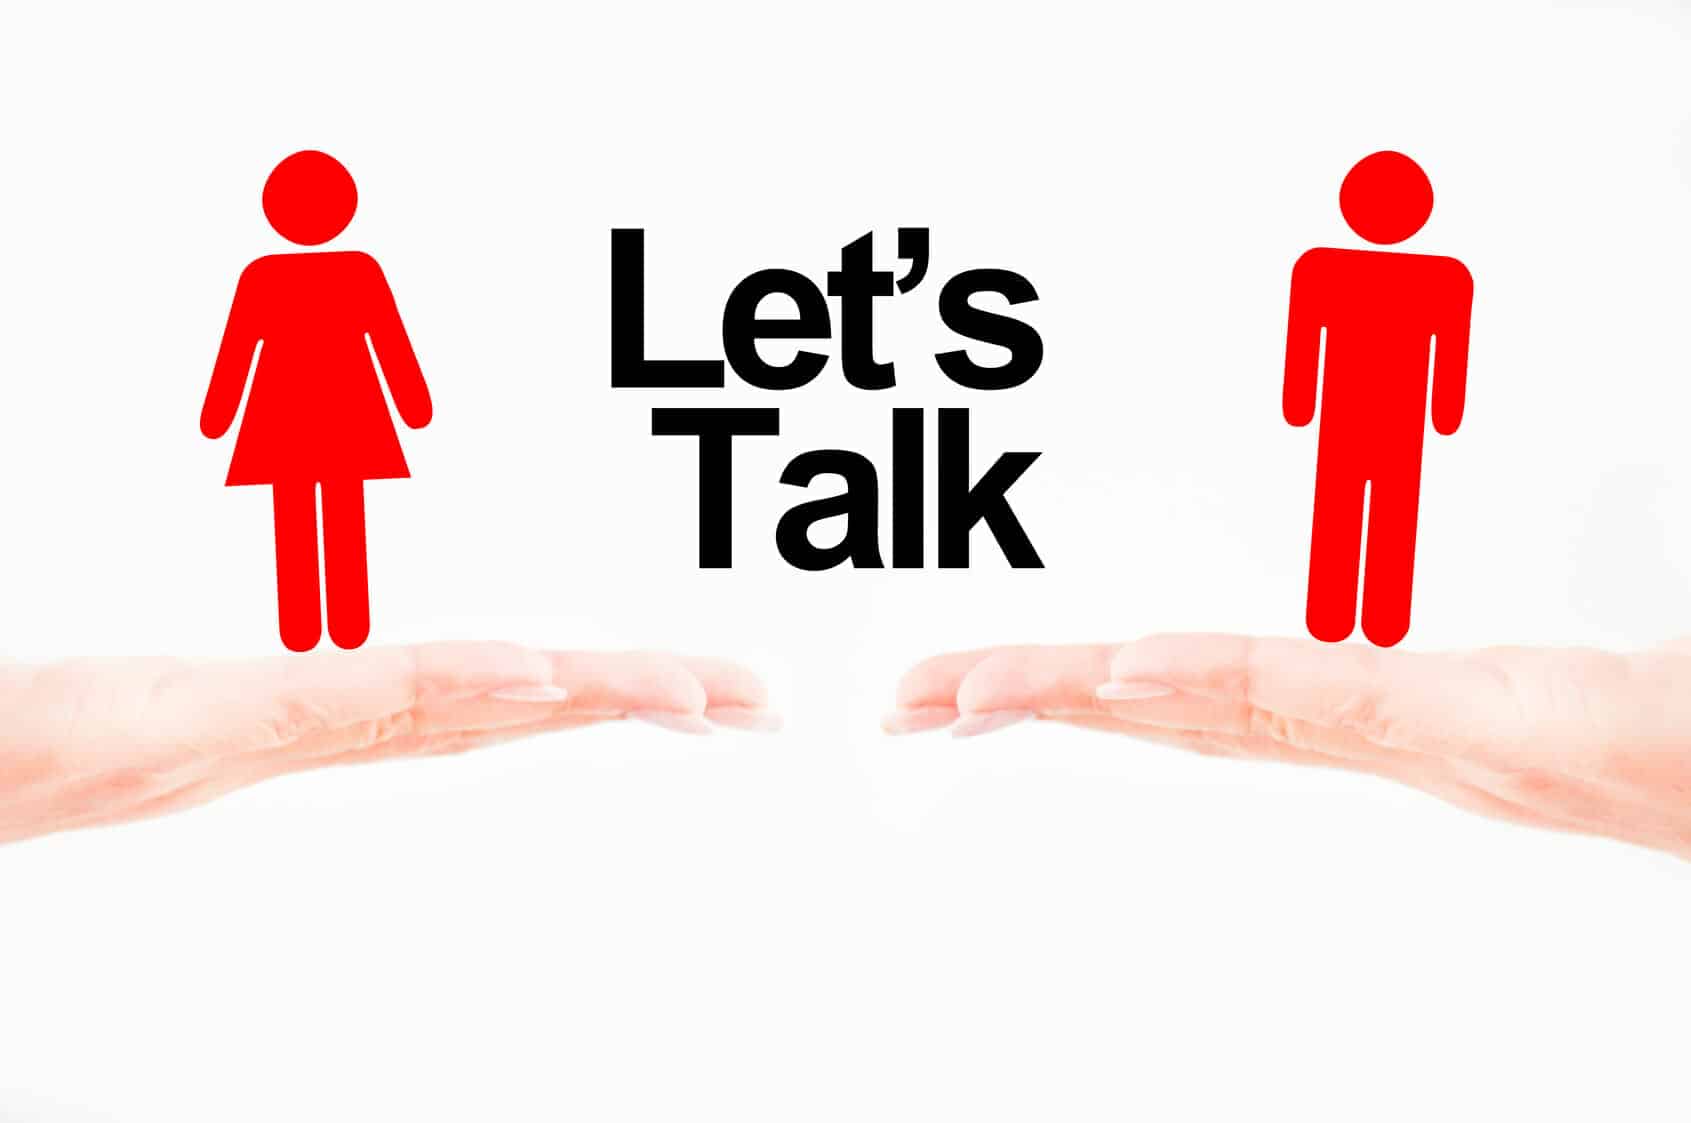 Hands holding red figures of a man and a woman with the words "Let's talk" between them.